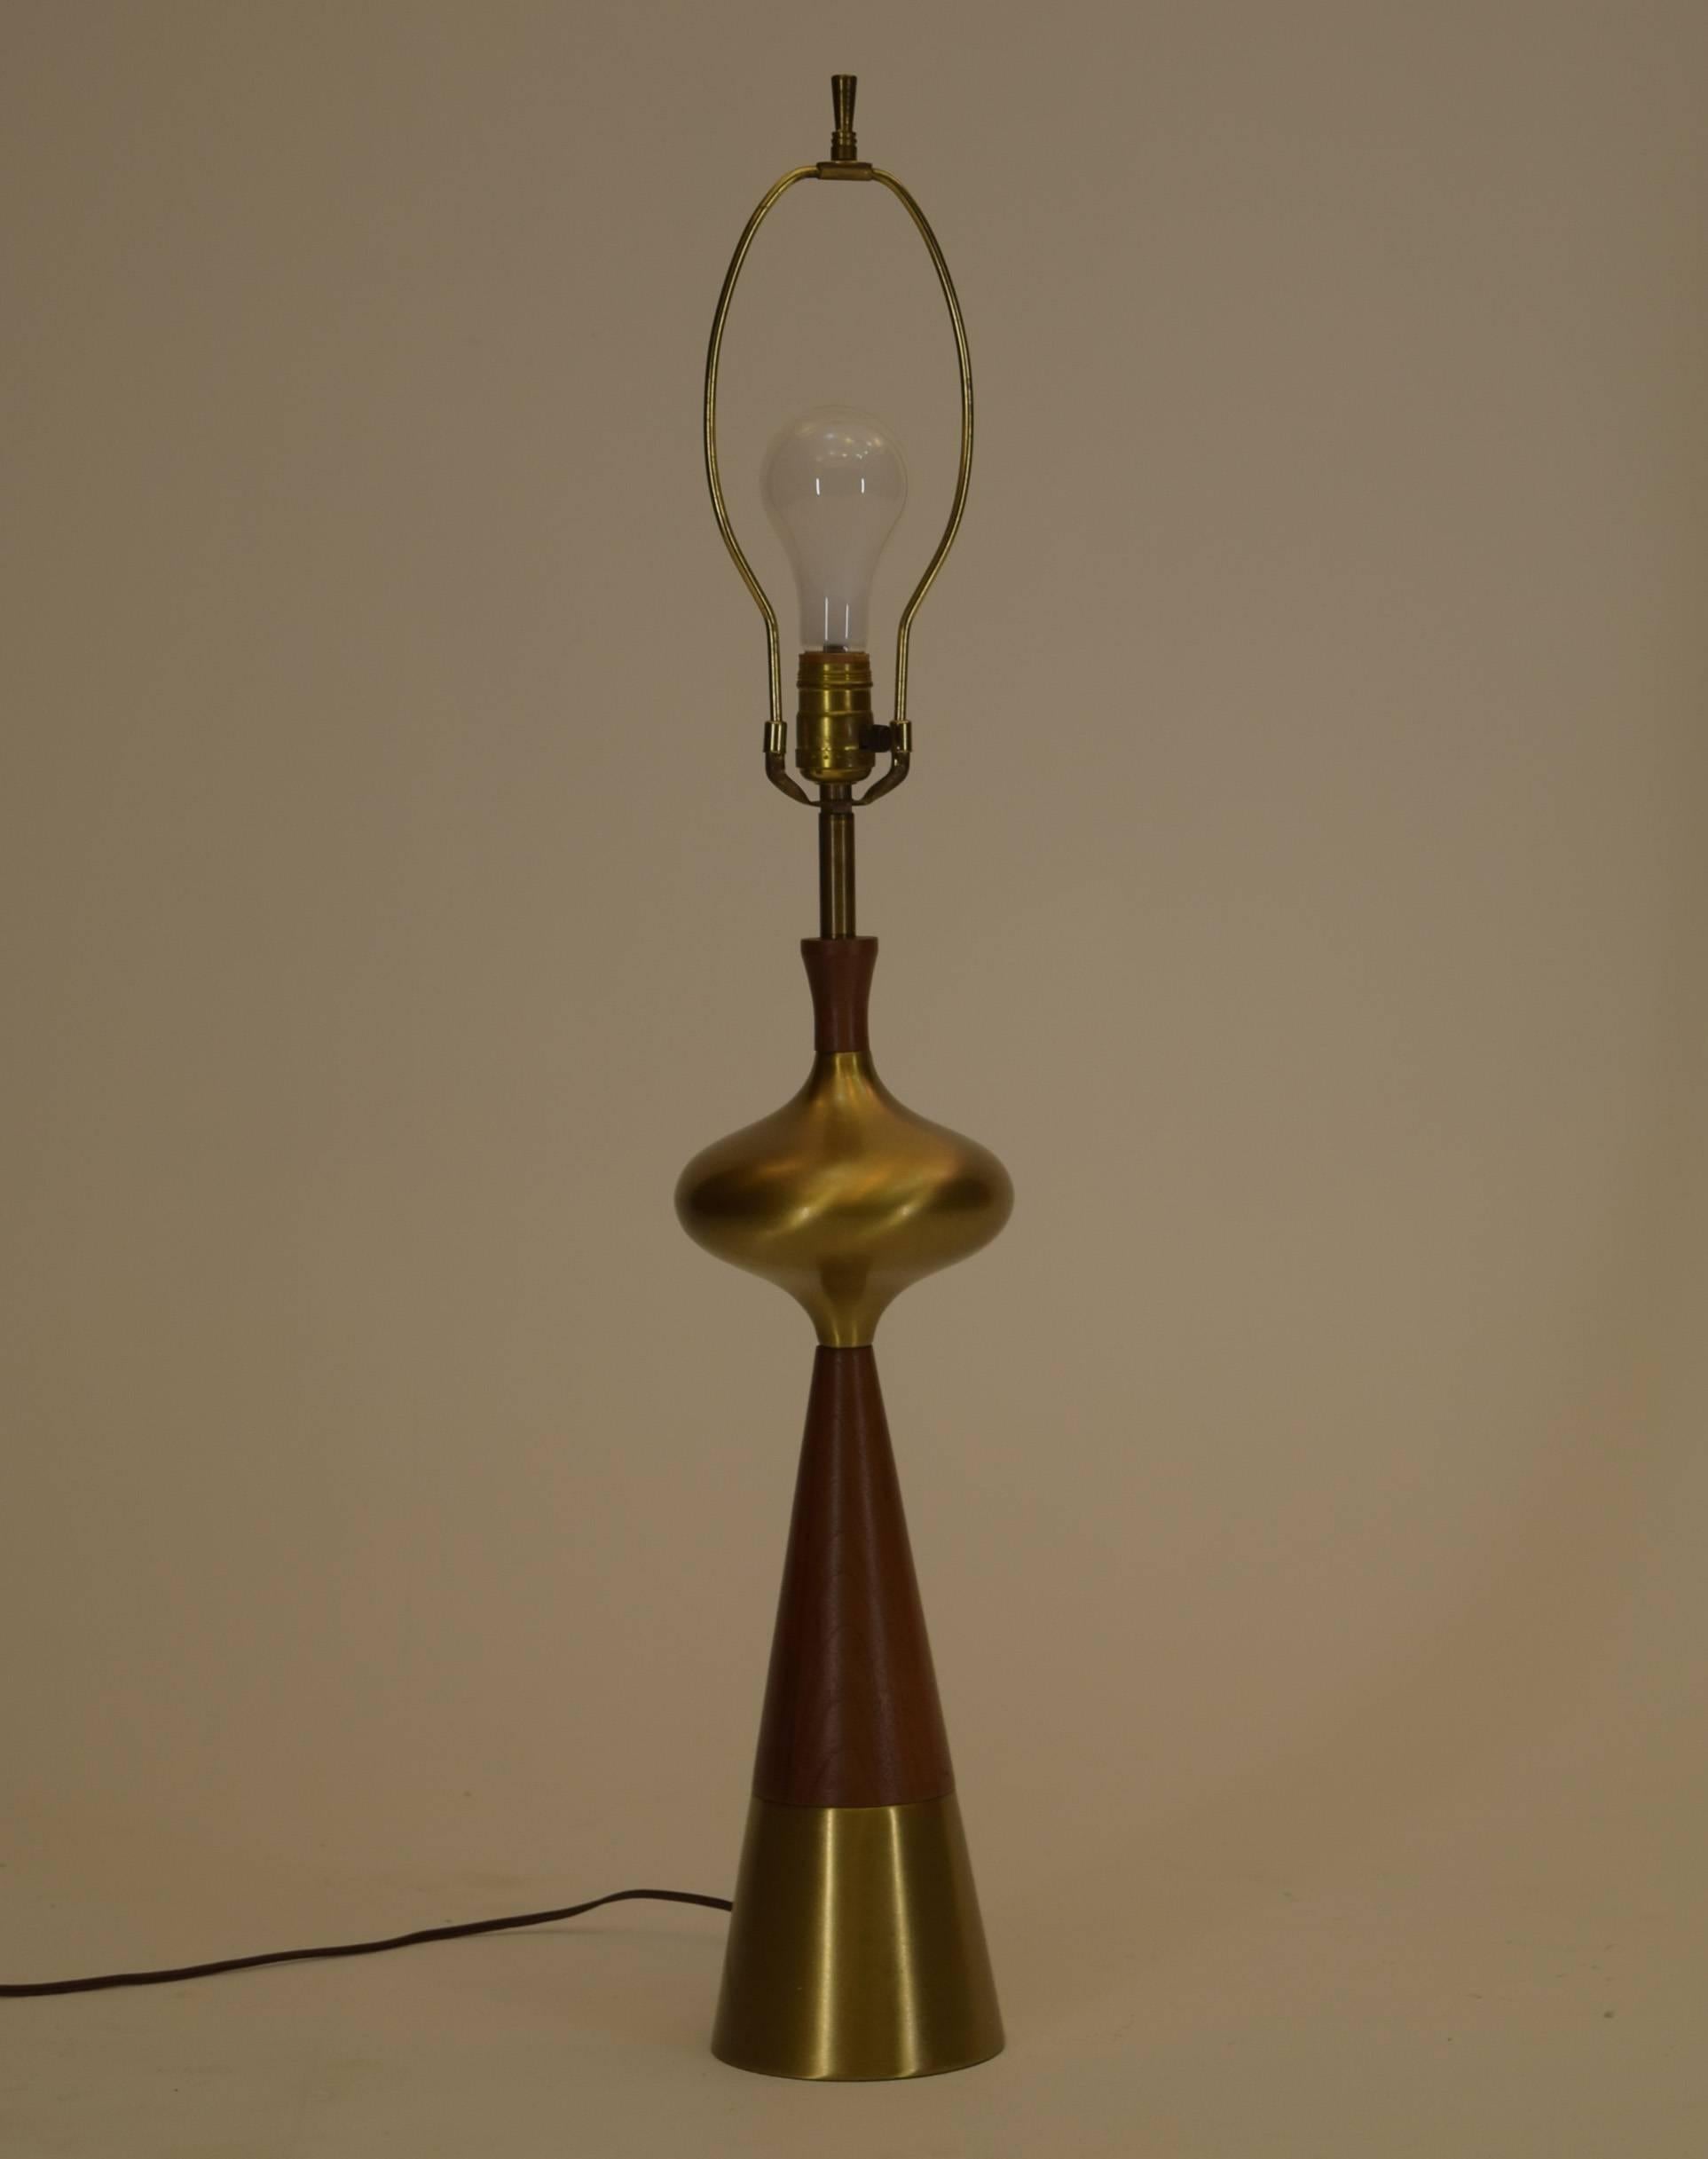 Featuring sculpted walnut coupled with solid brass components, this singular lamp by Tony Paul is a masterpiece in danish design with American thought.

Produced in 1955 and all original this lamp is in excellent condition.

The lamp shade is